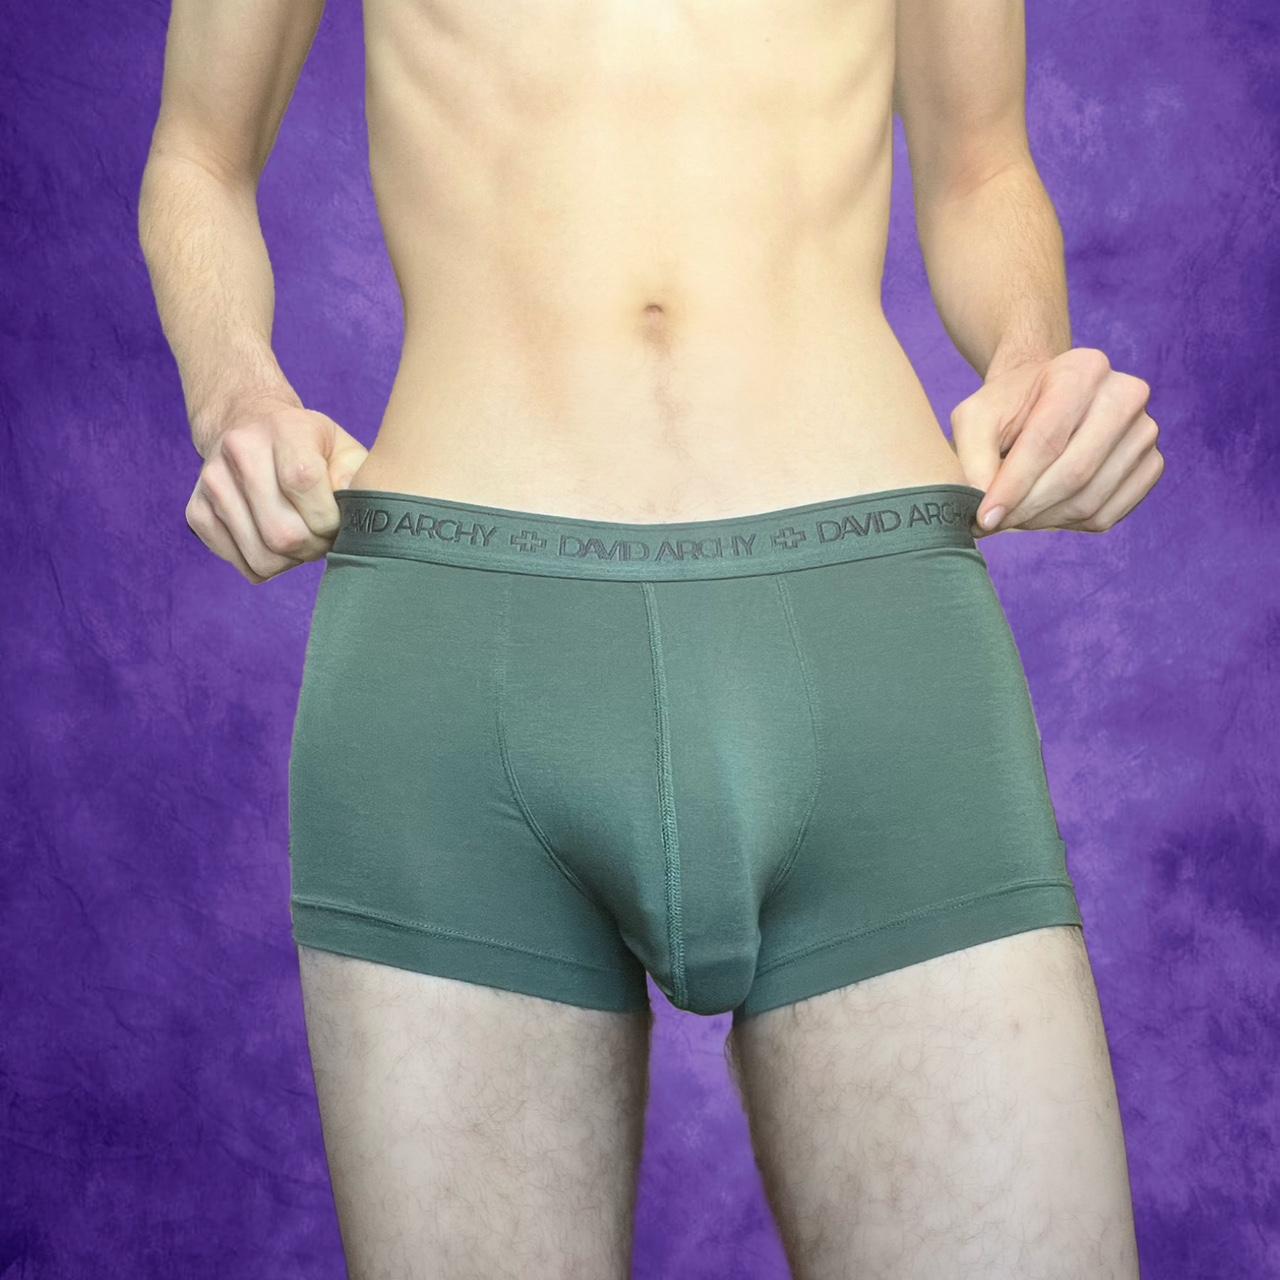 david archy underwear - Buy david archy underwear with free